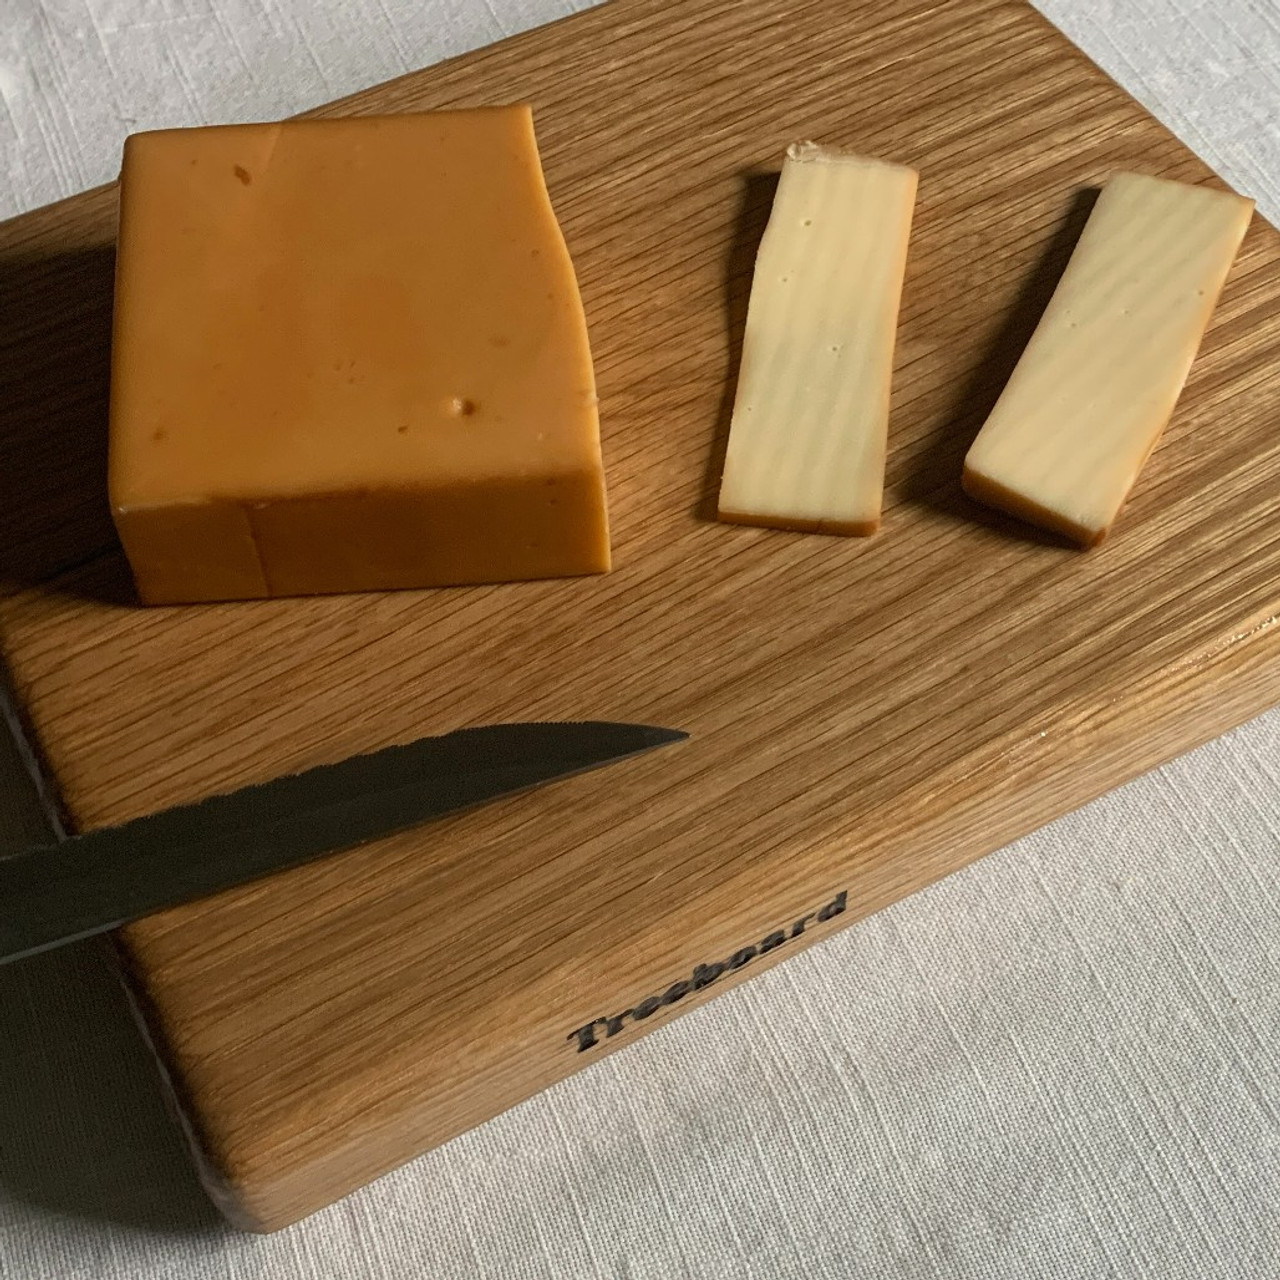 https://cdn11.bigcommerce.com/s-1vey7r6116/images/stencil/1280x1280/products/130/497/small-white-oak-cutting-board-by-Treeboard-knife-cheese__89054.1669344772.jpg?c=1